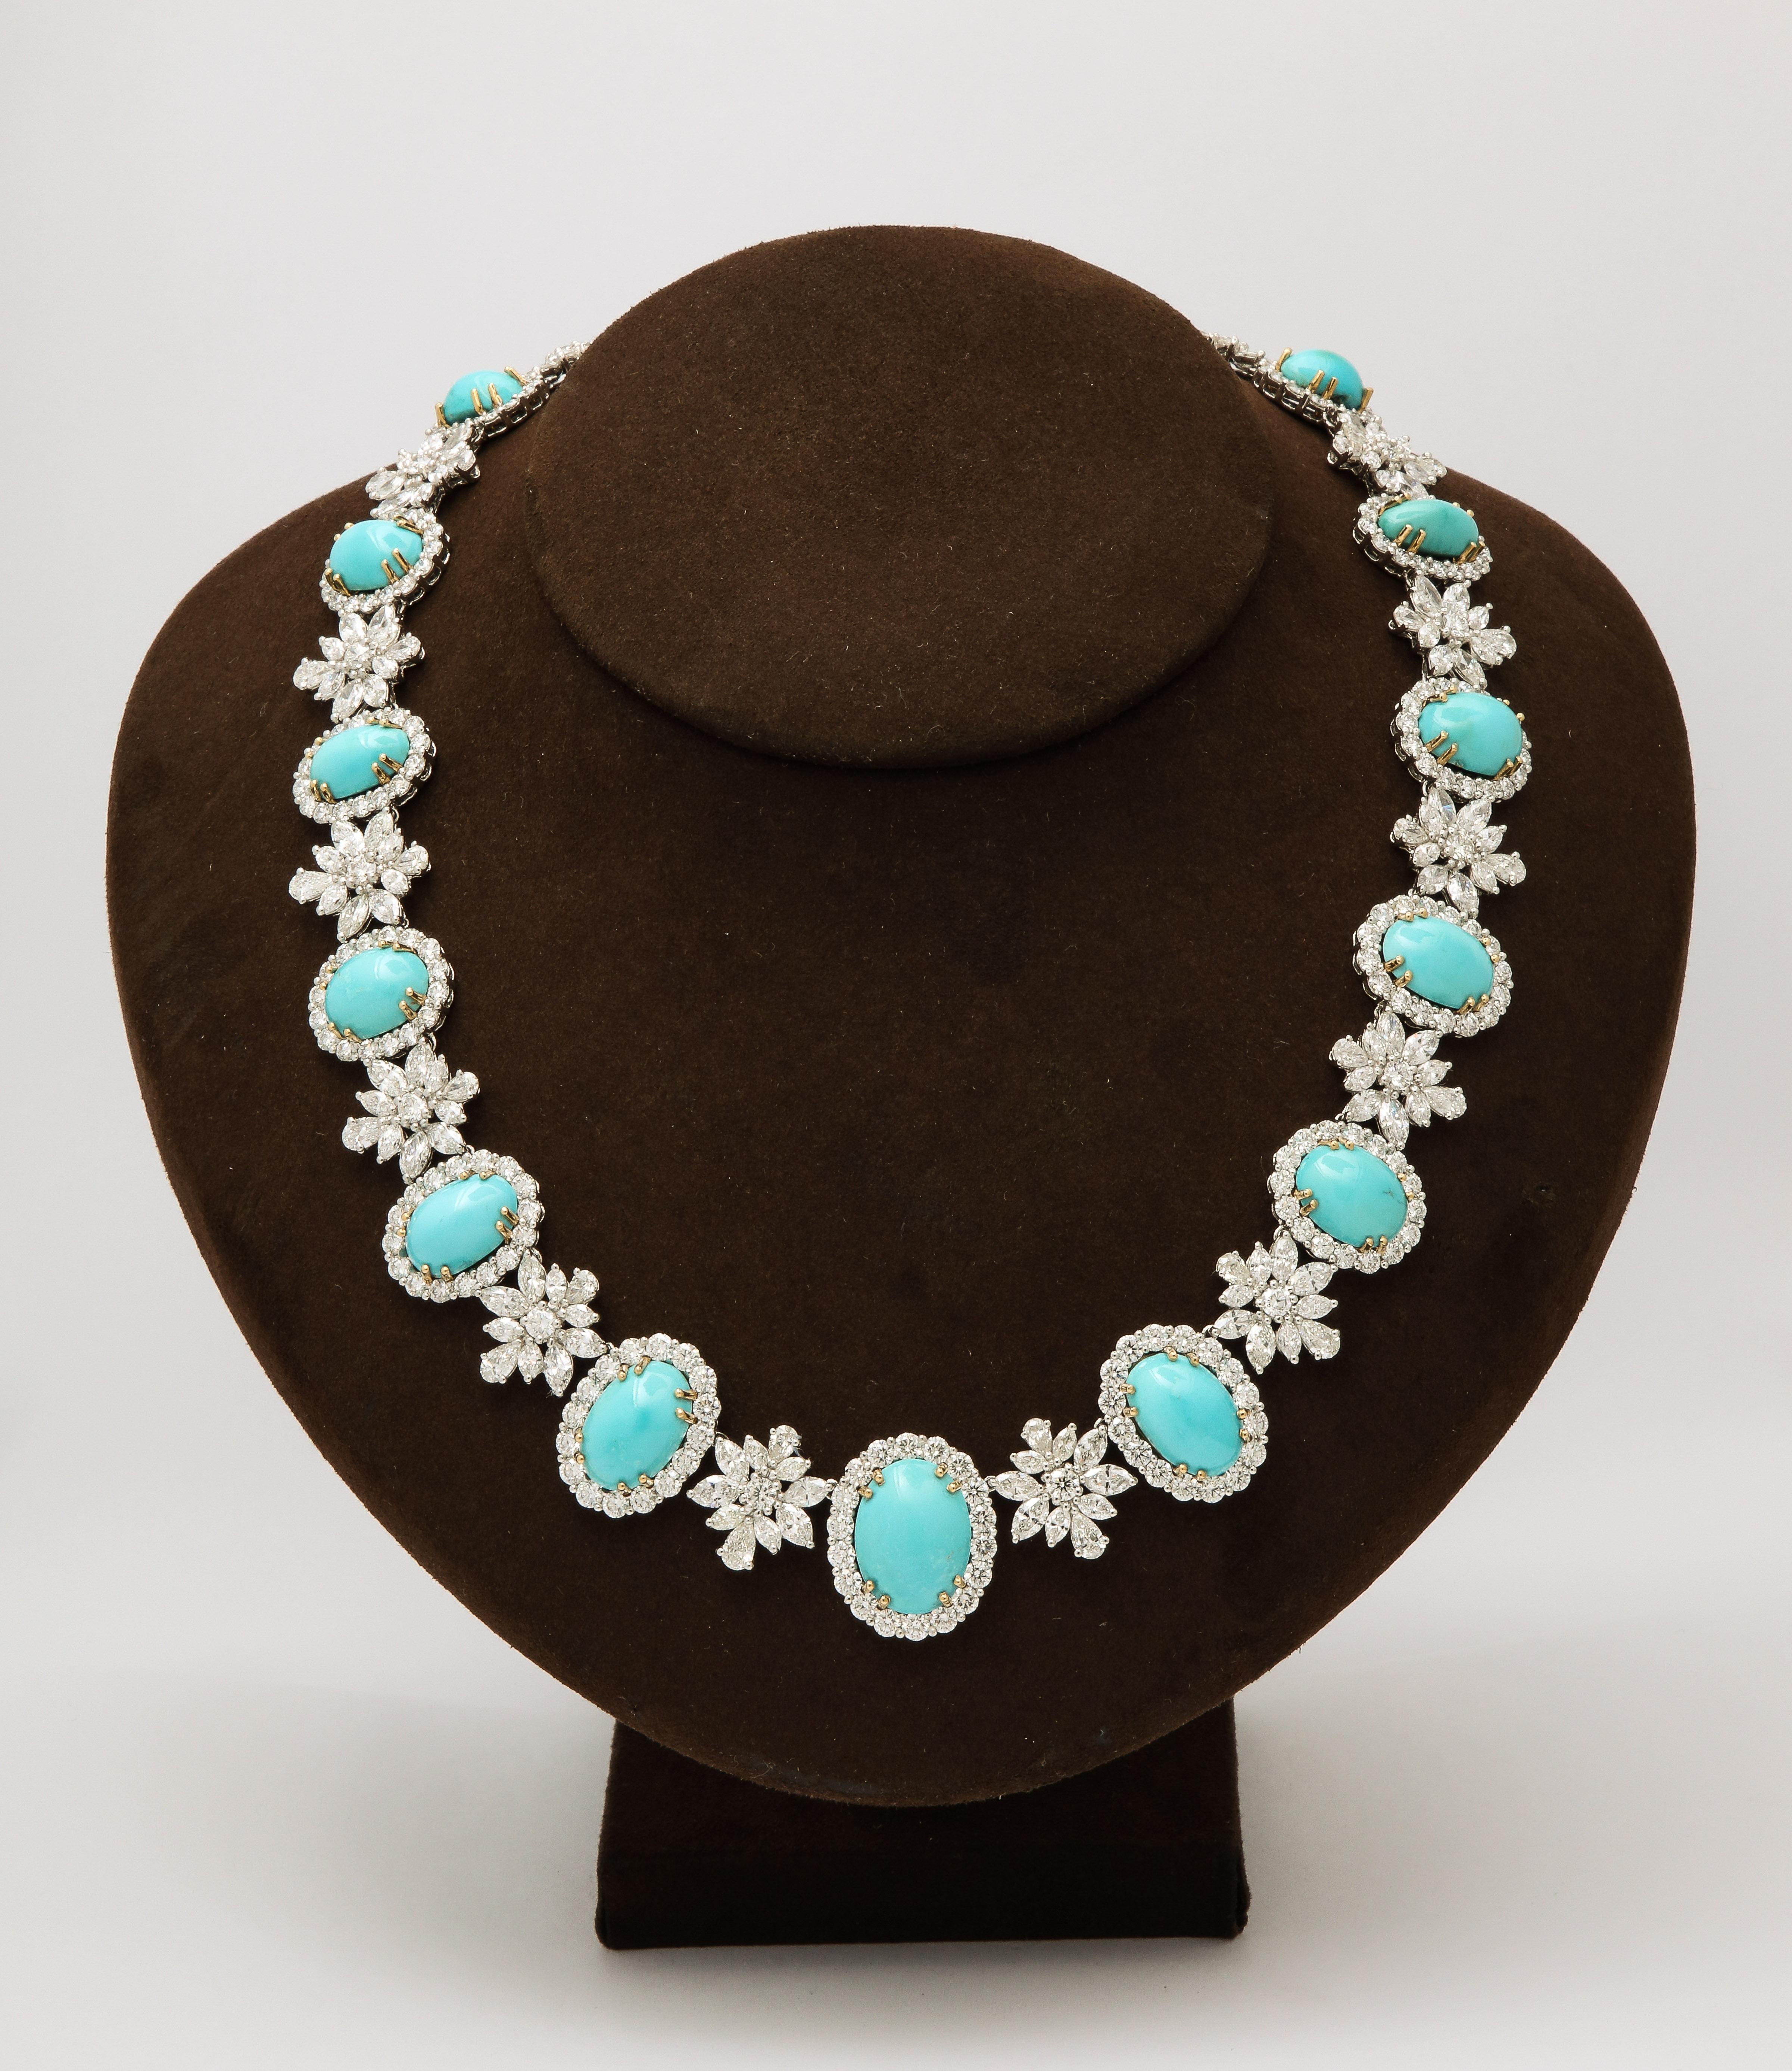 
An INCREDIBLE necklace with Fine Persian Turquoise. 

102 carats of Persian Turquoise 

59.95 carats of white pear, round and marquise cut diamonds. 

Set in platinum 

18 inch length that can be adjusted if necessary. 

A beautiful piece with